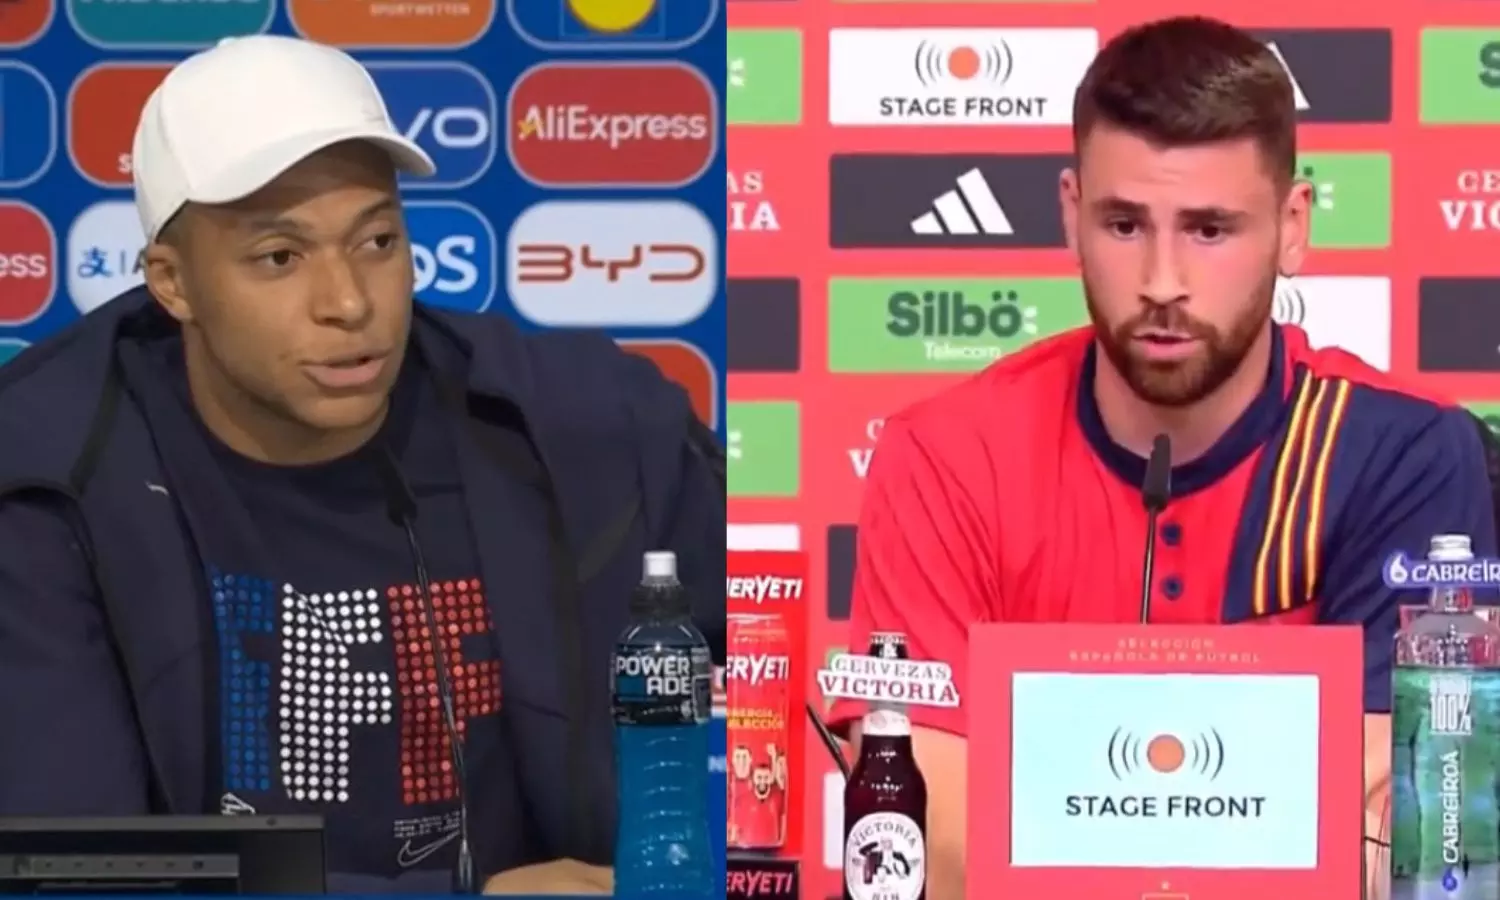 We should leave politics to others: Spain goalkeeper takes a dig at Mbappe